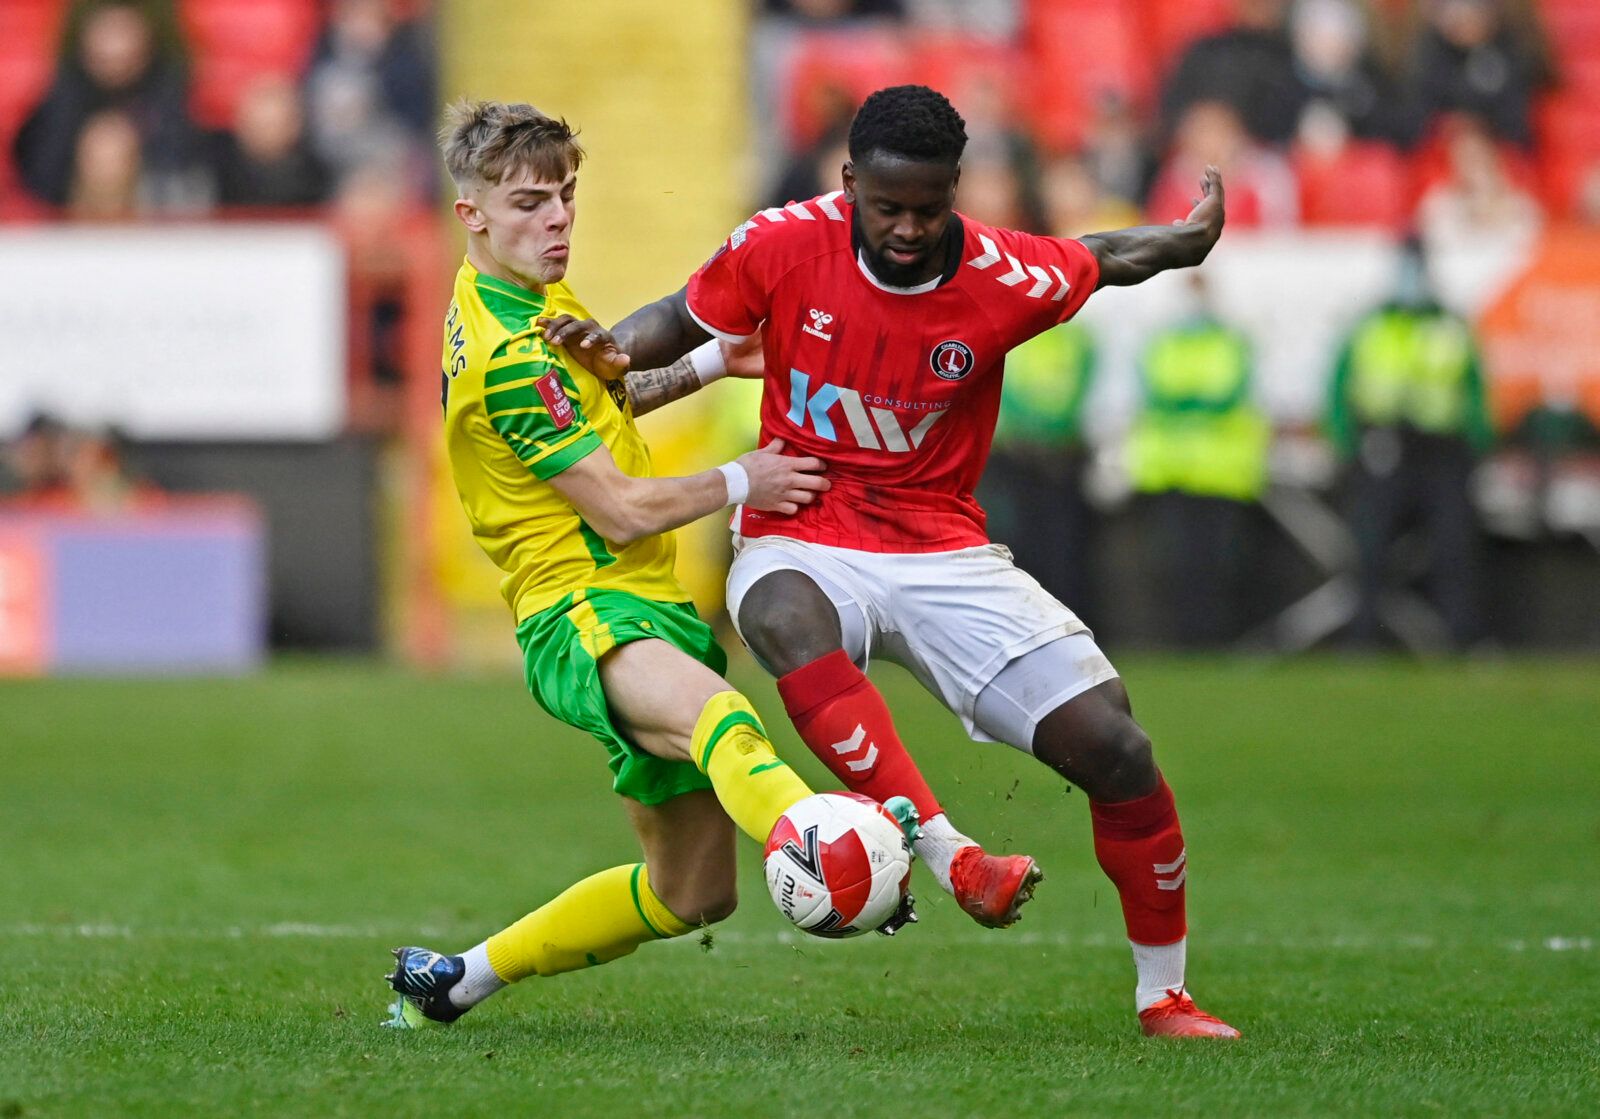 Soccer Football - FA Cup Third Round - Charlton Athletic v Norwich City - The Valley, London, Britain - January 9, 2022 Charlton Athletic's Diallang Jaiyesimi in action with Norwich City's Brandon Williams REUTERS/Tony Obrien